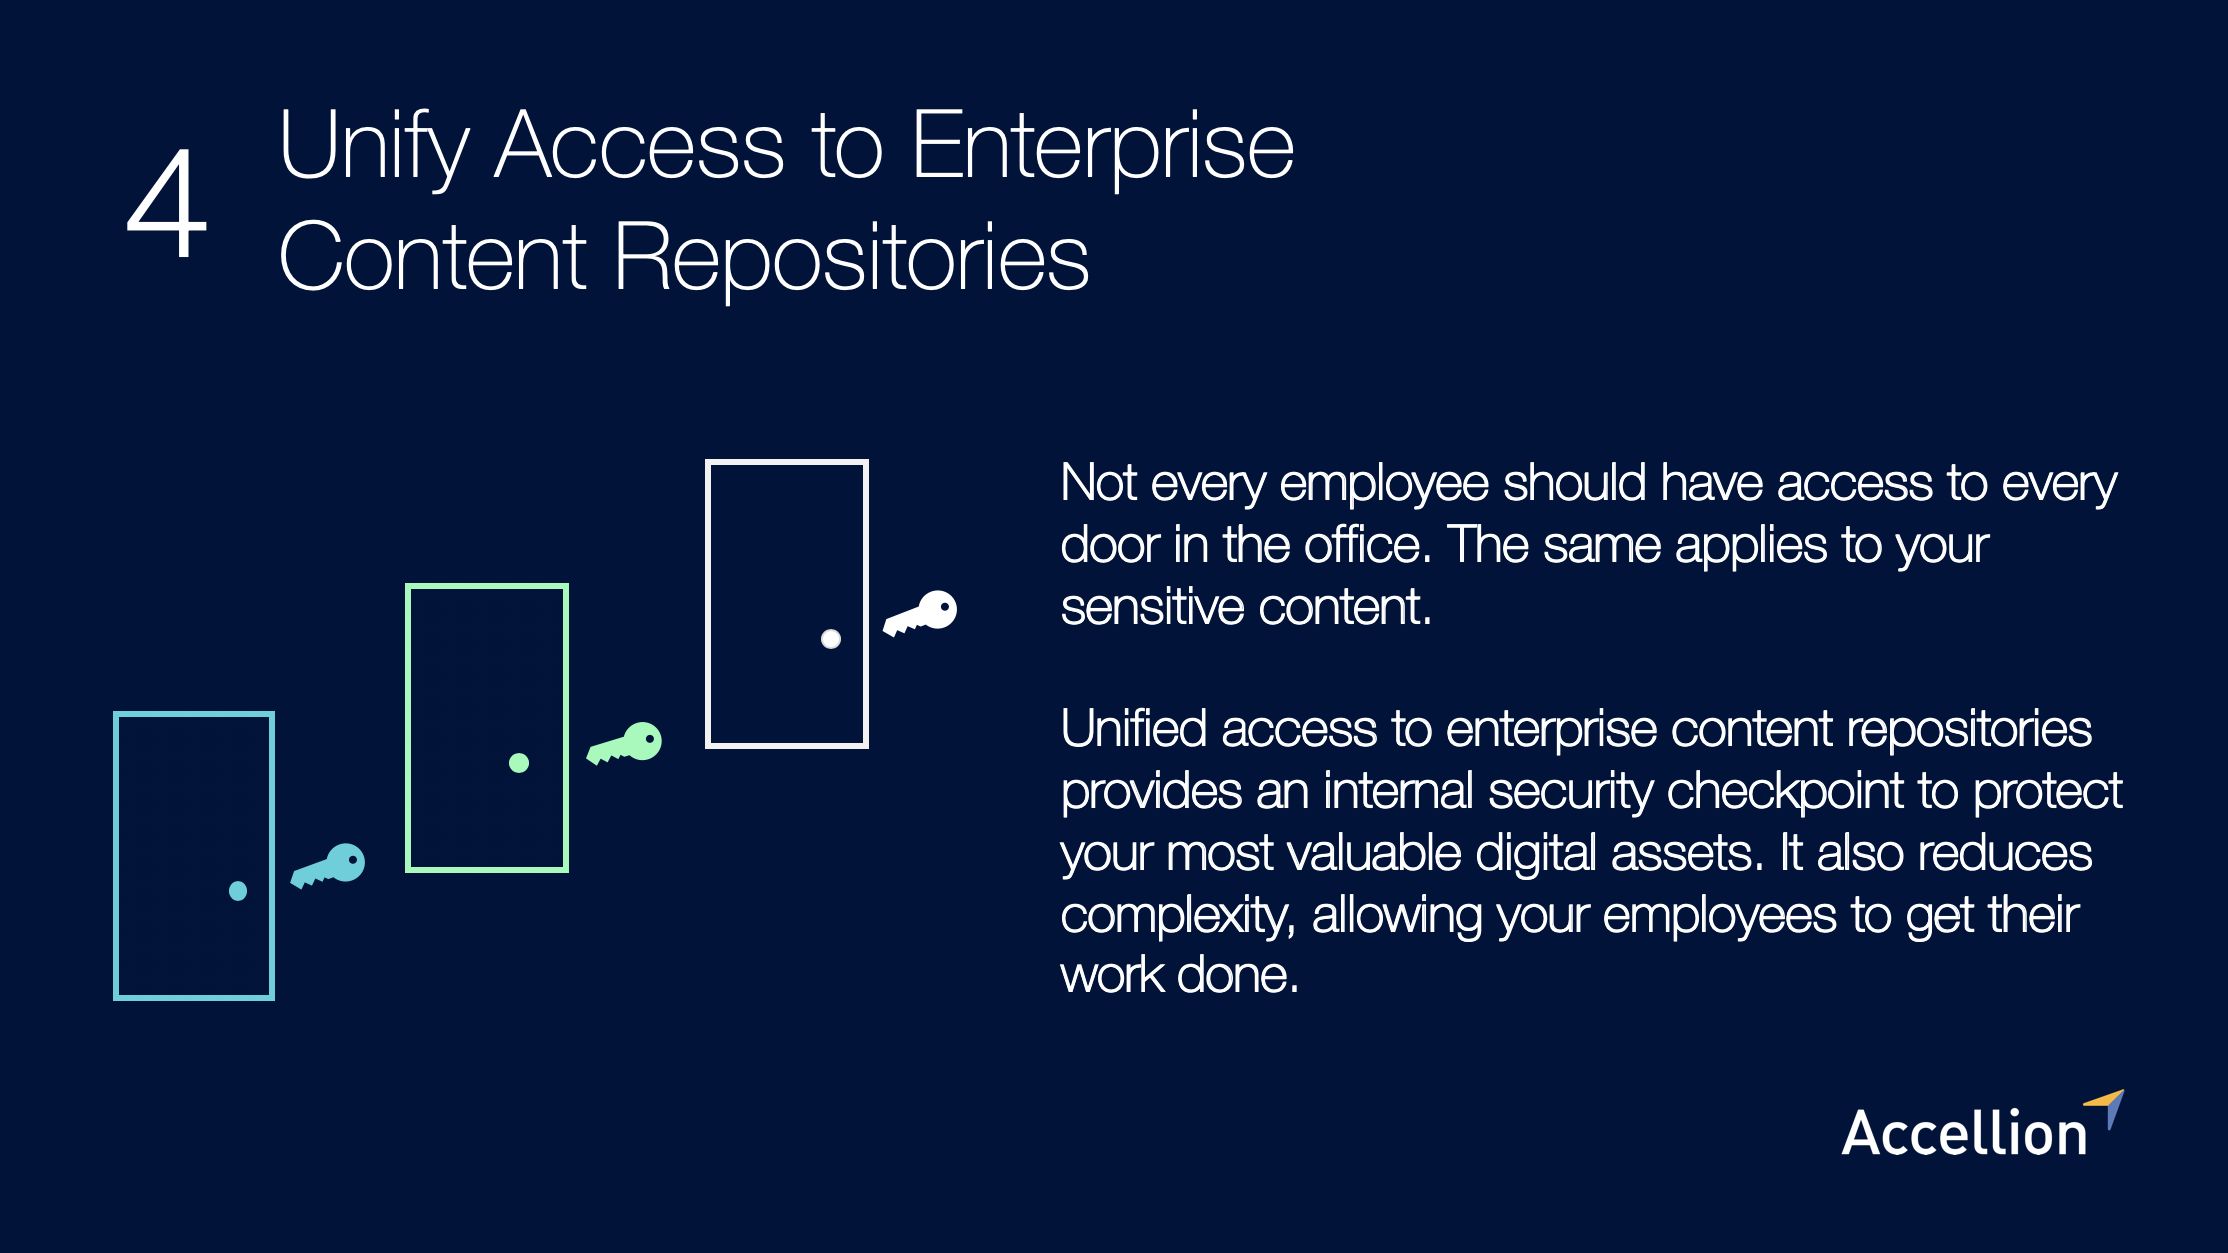 Unify Access to Enterprise Content Repositories